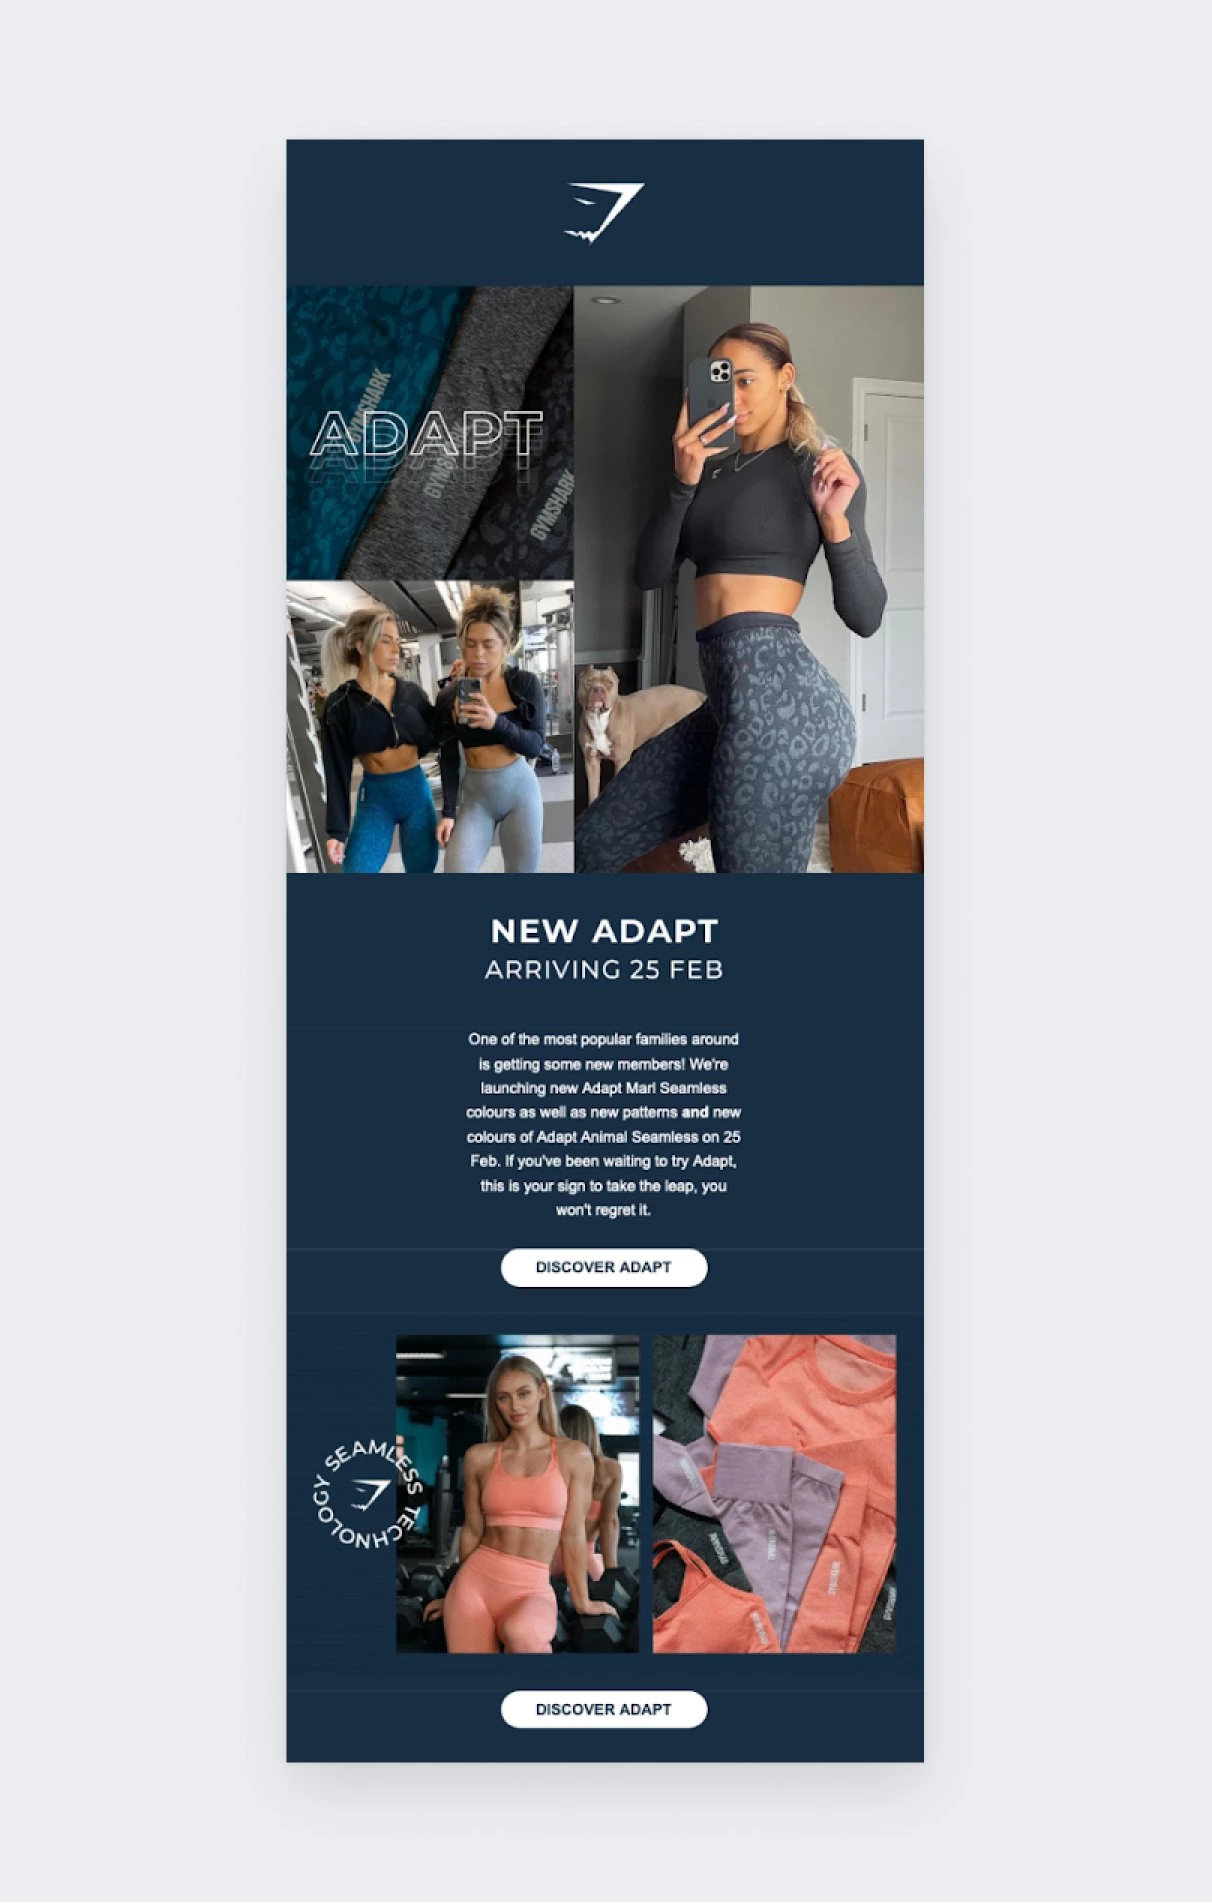 New product email example - Gymshark - date arriving launch